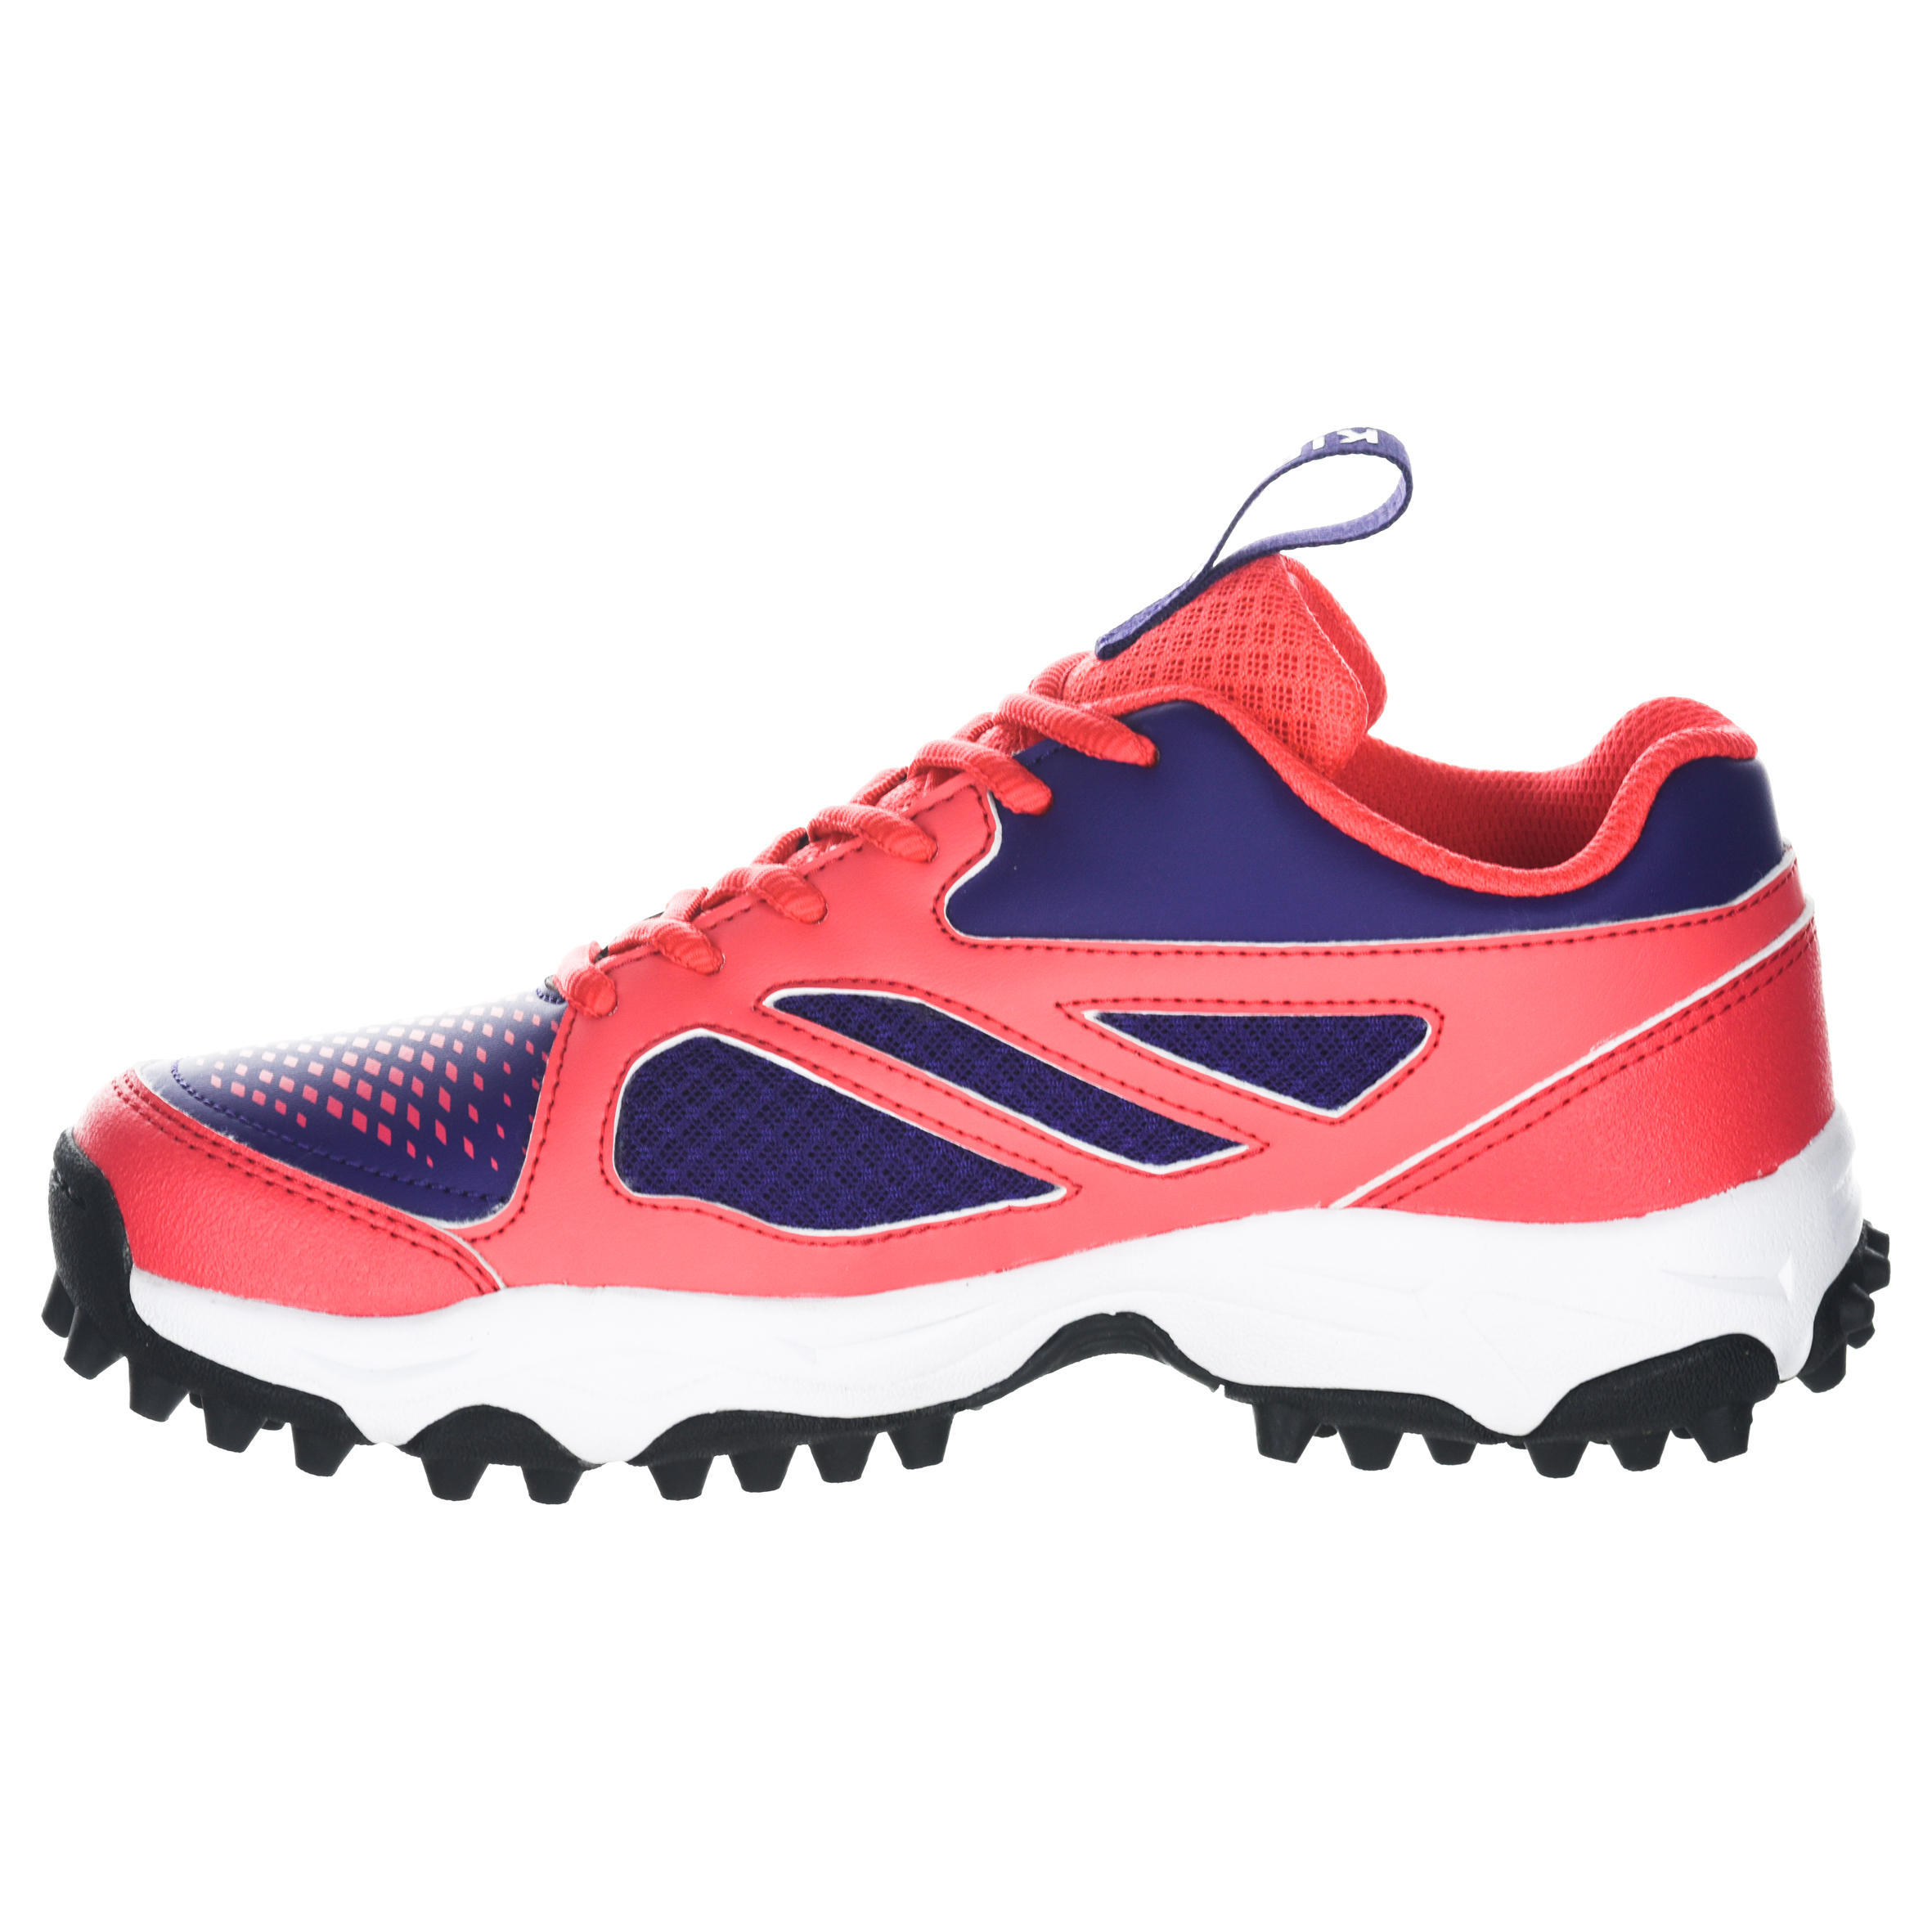 FH100 Kids' Low to Medium Intensity Field Hockey Shoes - Pink 3/13